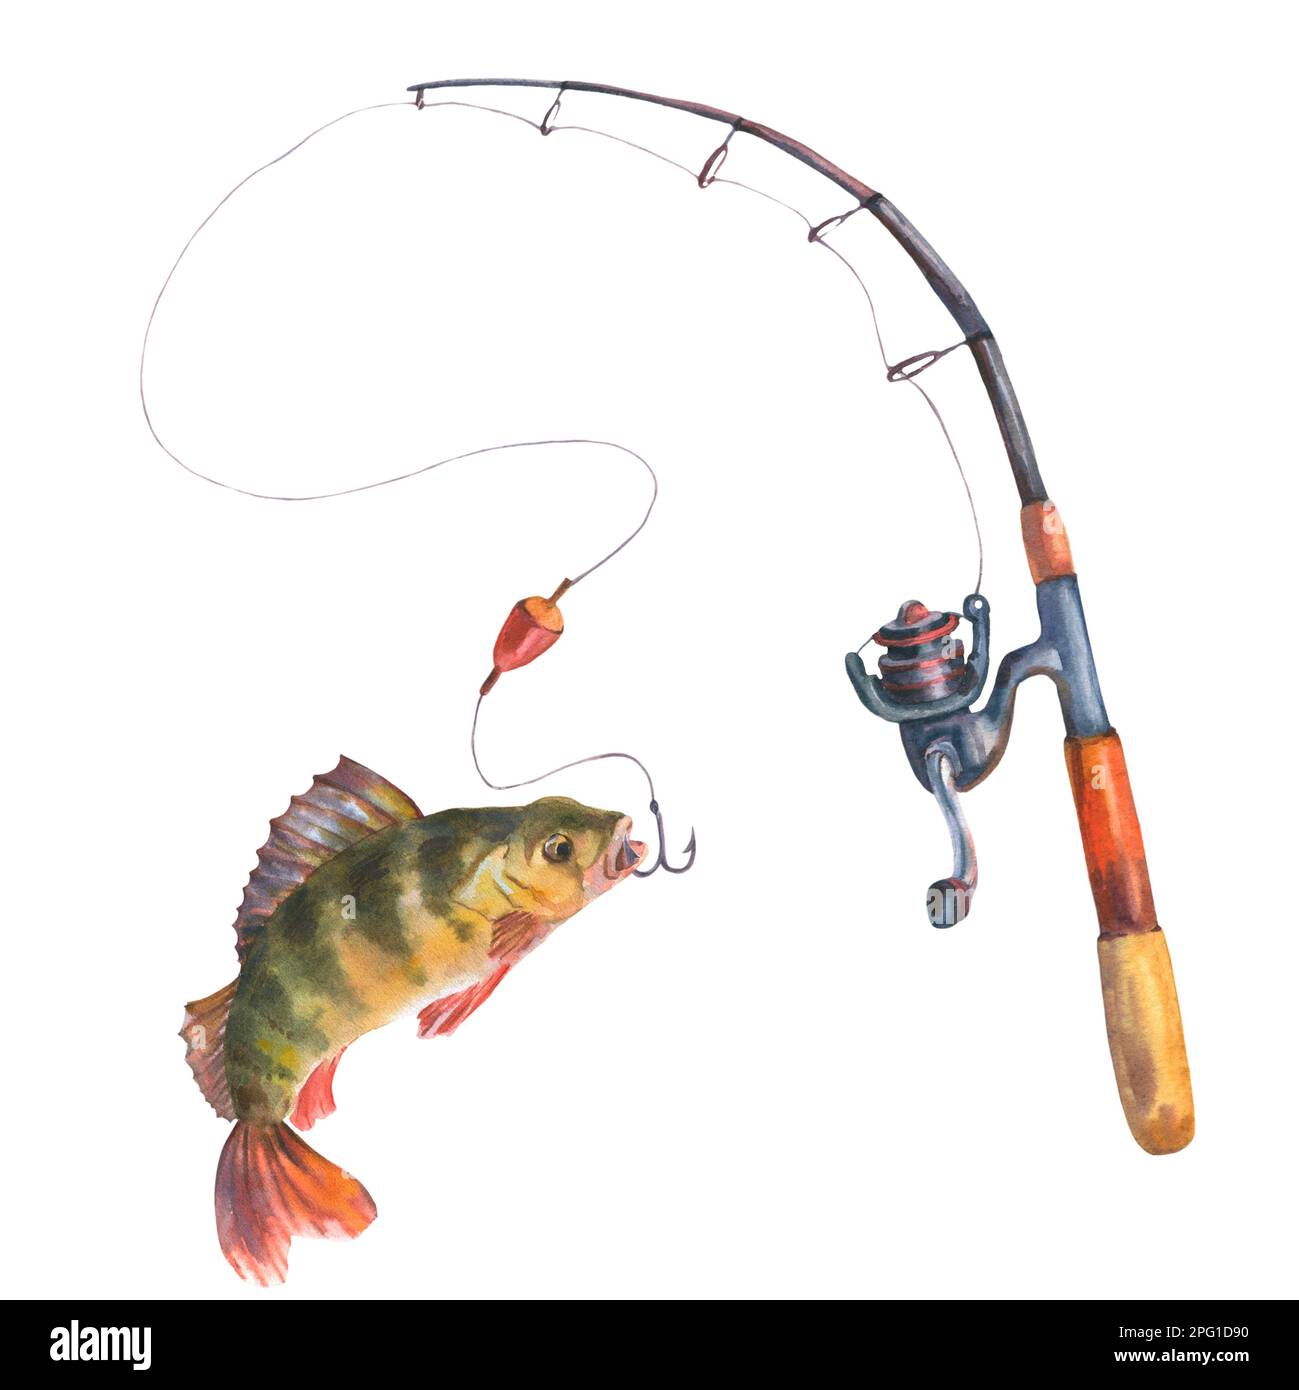 https://c8.alamy.com/comp/2PG1D90/watercolor-illustration-of-a-perch-caught-with-a-fishing-rod-on-a-hook-cut-out-clip-art-element-for-design-postcards-stickers-scrapbooking-poster-2PG1D90.jpg